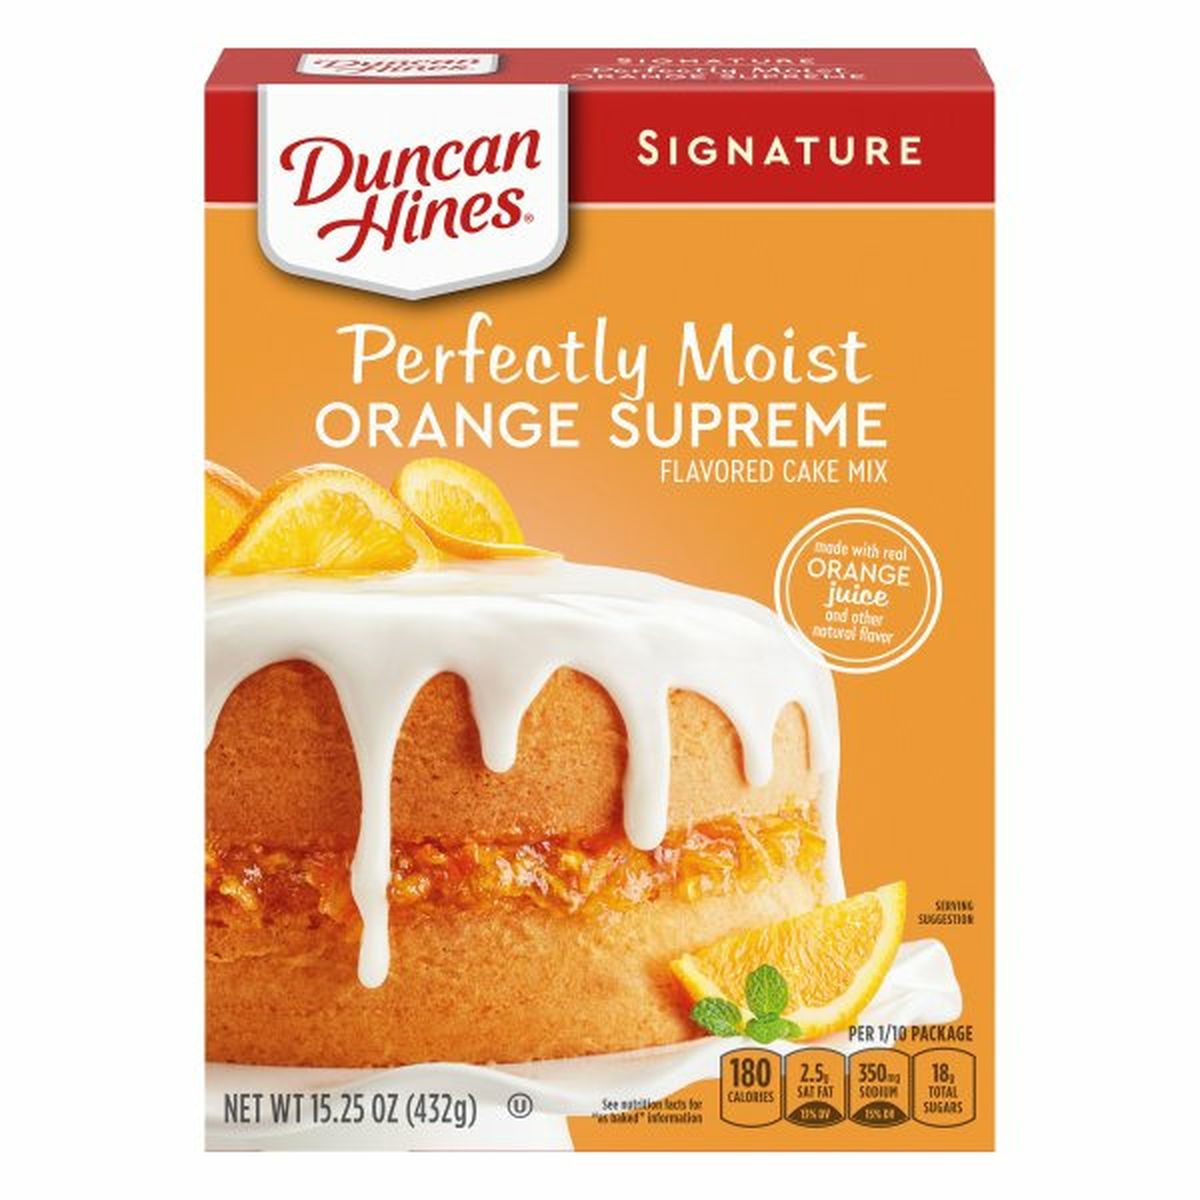 Calories in Duncan Hines Signature Flavored Cake Mix, Orange Supreme, Perfectly Moist